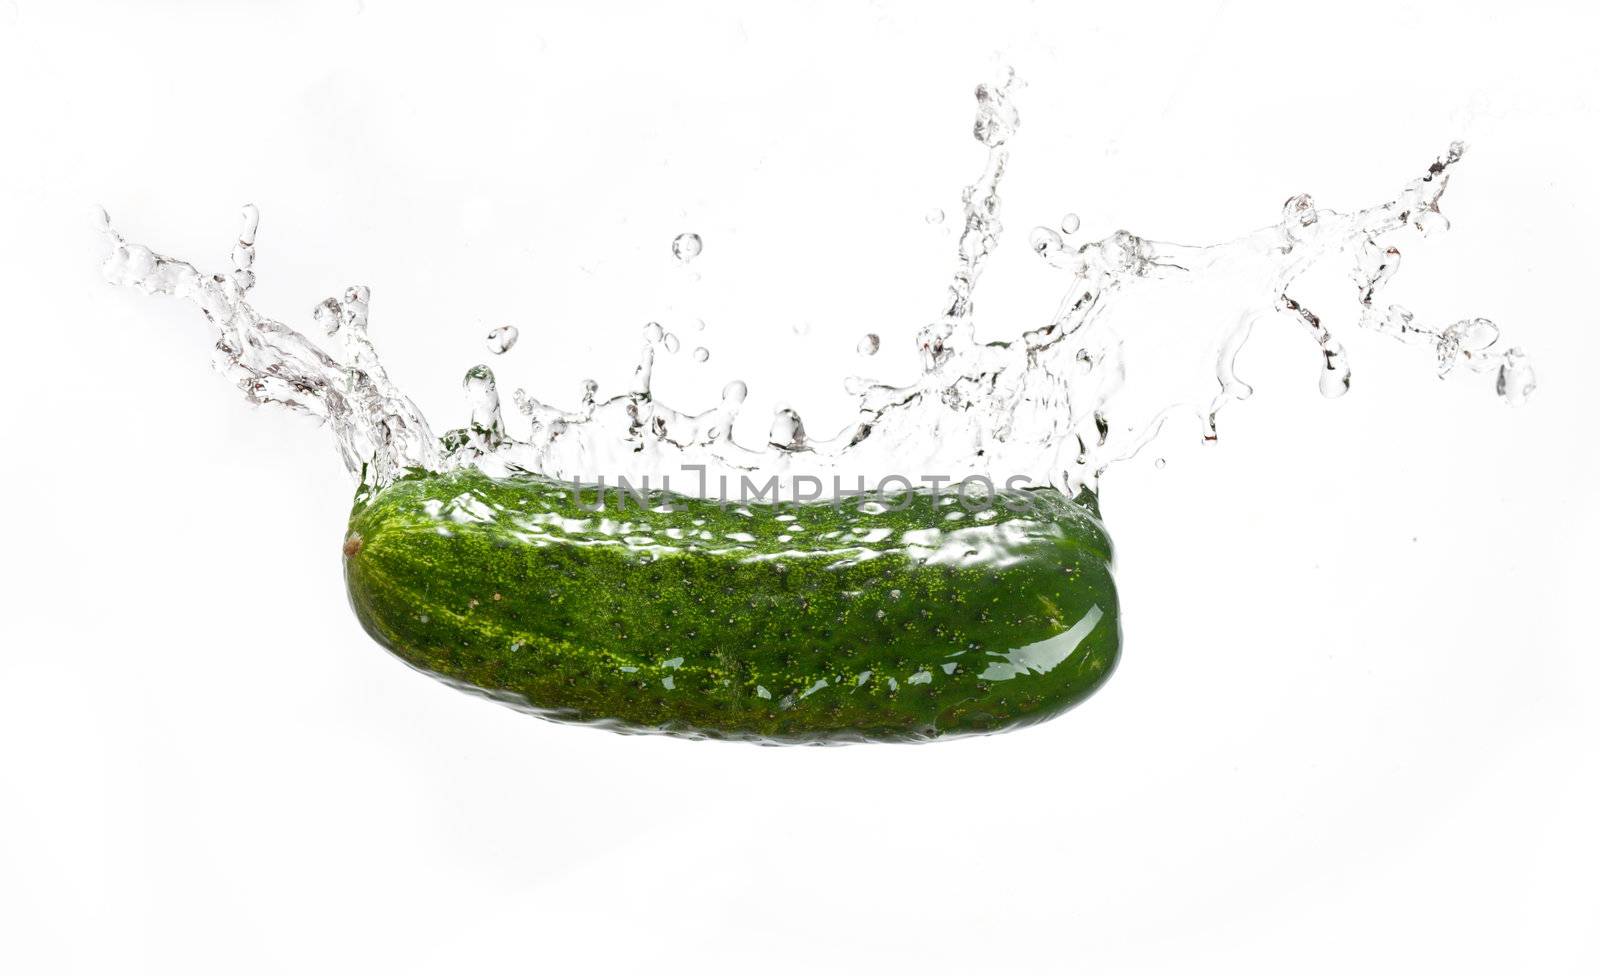 water splash with cucumber  by agg